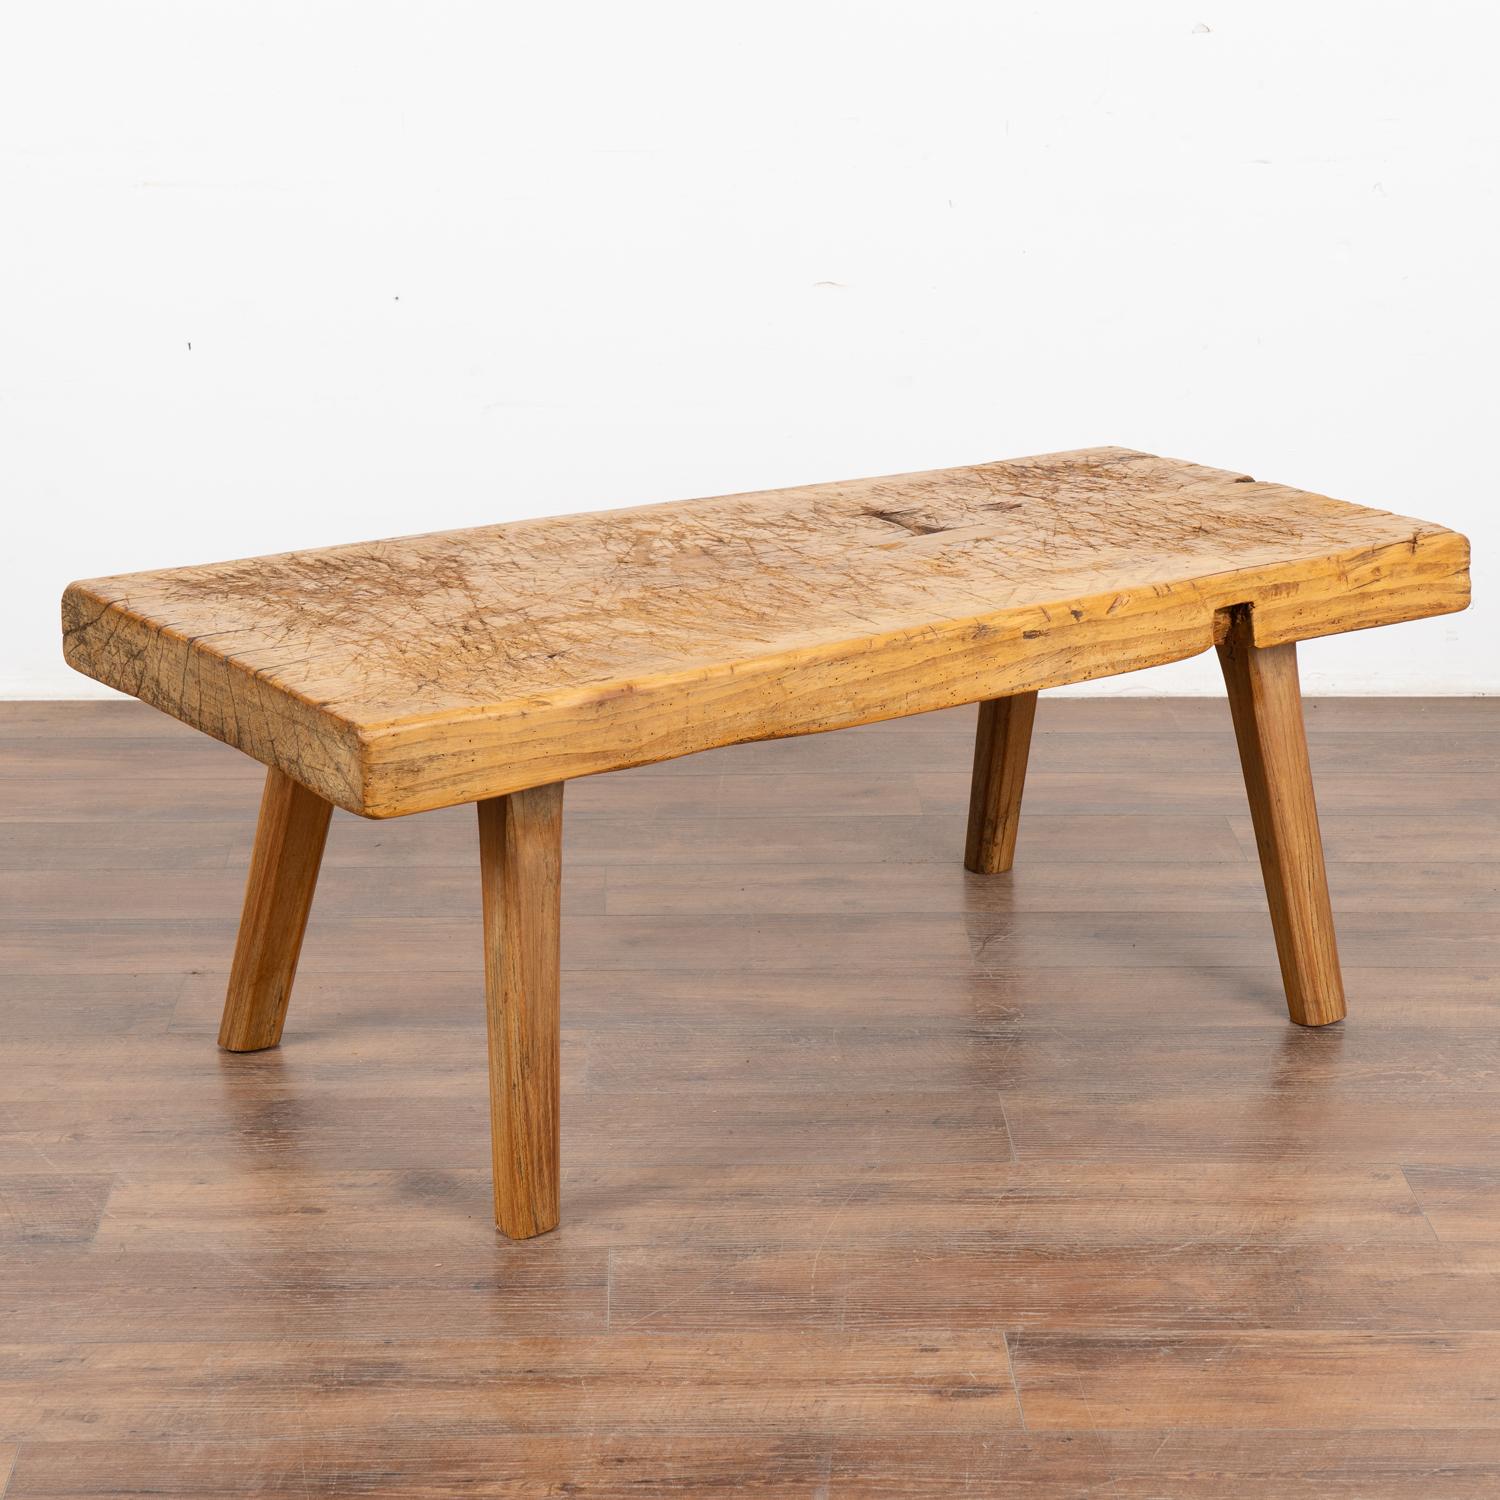 The appeal of this rustic coffee table comes from the thick hard wood top that originally served as a work table, resting on strong squared peg splay legs. 
Note the heavy gouges, nicks, old cracks and stains that all combine to build the vintage